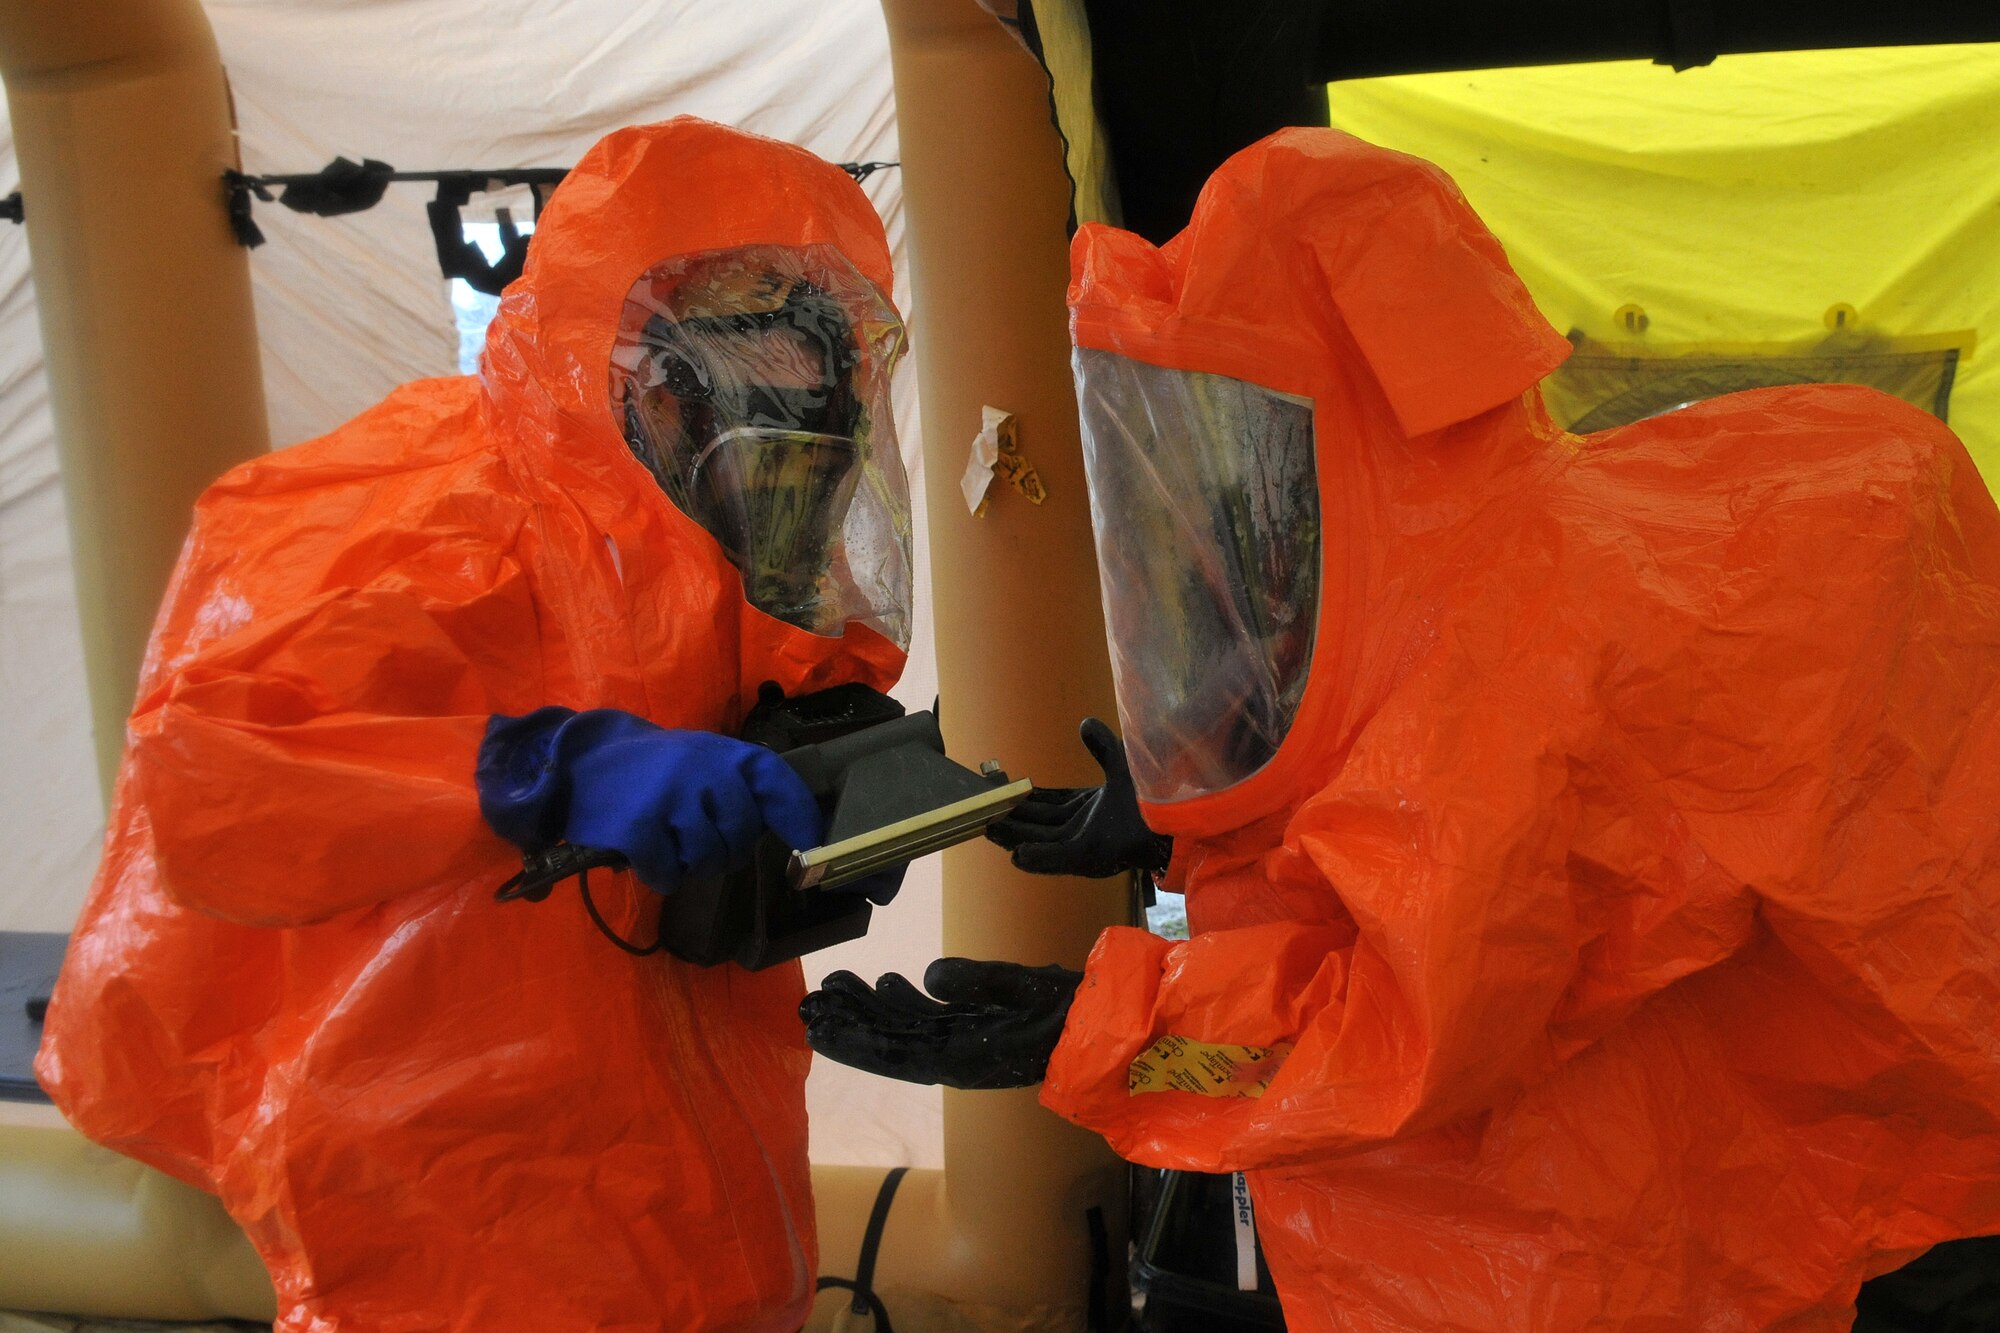 Members of the 52nd Civil Support Team, Ohio National Guard, make their way through the decontamination tent taking necessary steps to ensure their overall safety after exiting the downtown Toledo, Ohio School March 10, 2016. The training exercise was designed to enhance familiarization of equipment and build partnership with civil and military organizations to strengthen real-world emergency response capabilities. (Air National Guard photo by Airman 1st Class Benjamin A. Maciejewski)